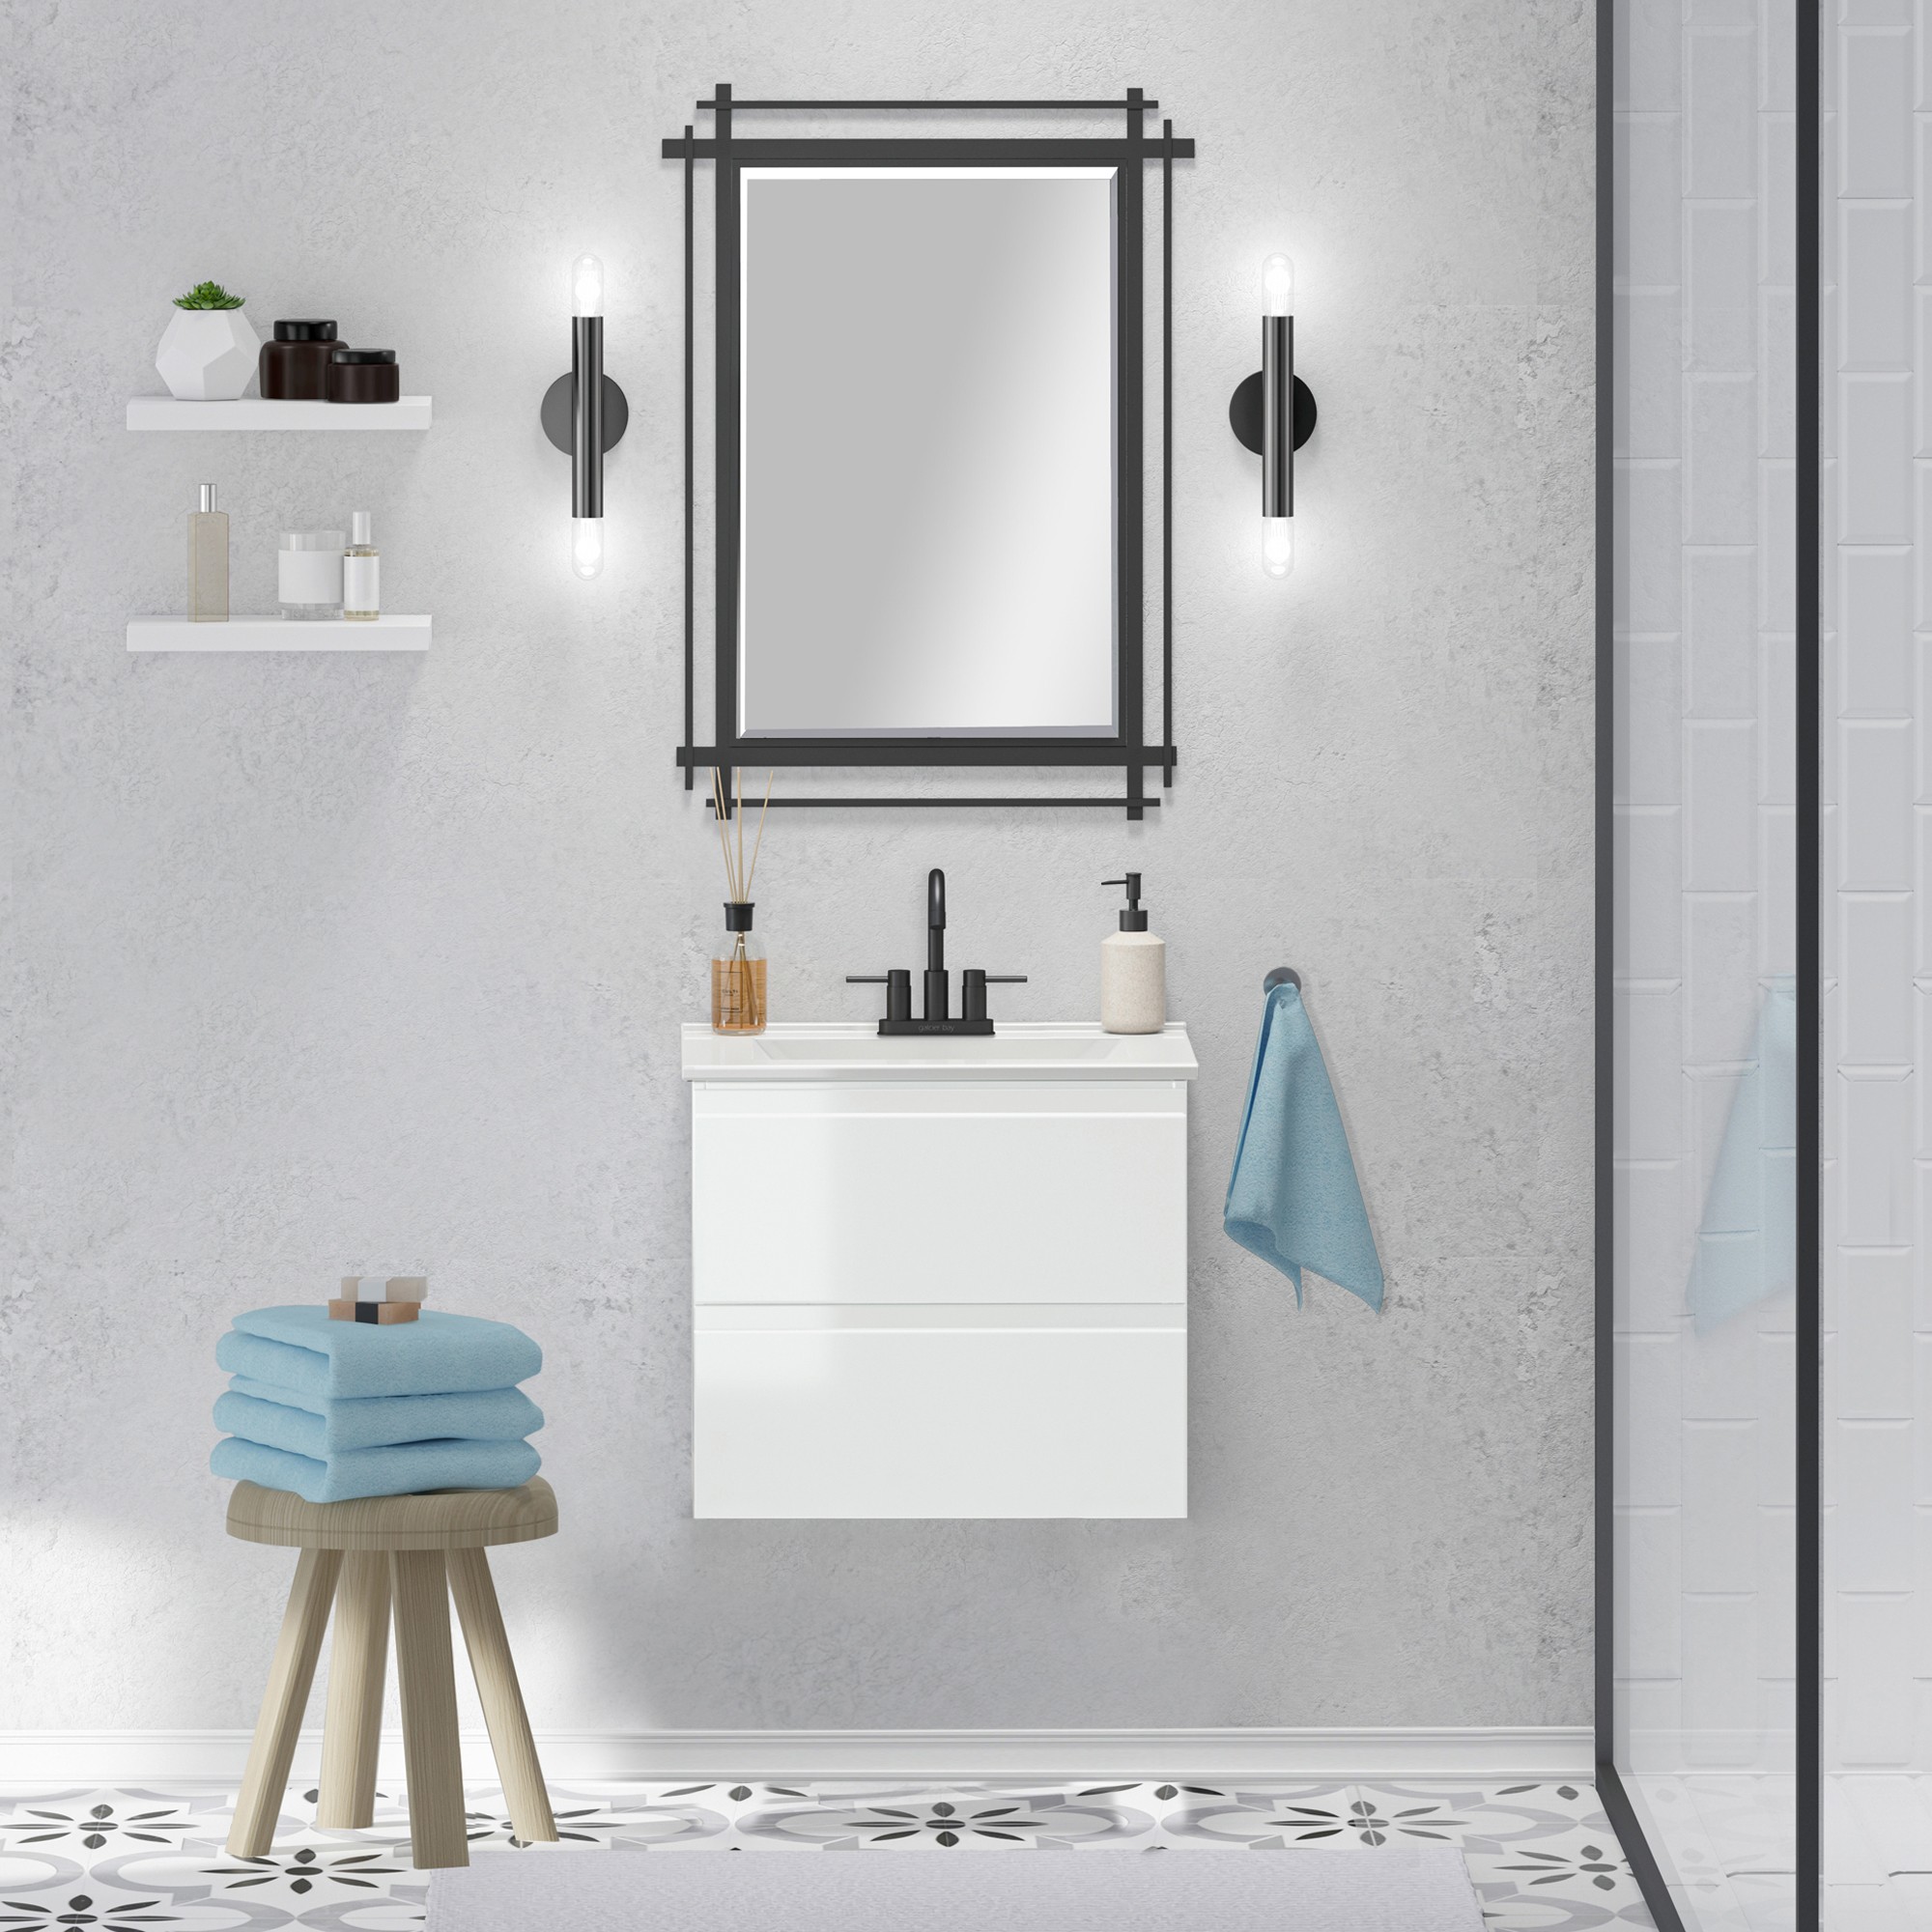 Celsia 24 in. W x 18-1/2 in. D Vanity in White Gloss with Porcelain Vanity Top in White with White Basin